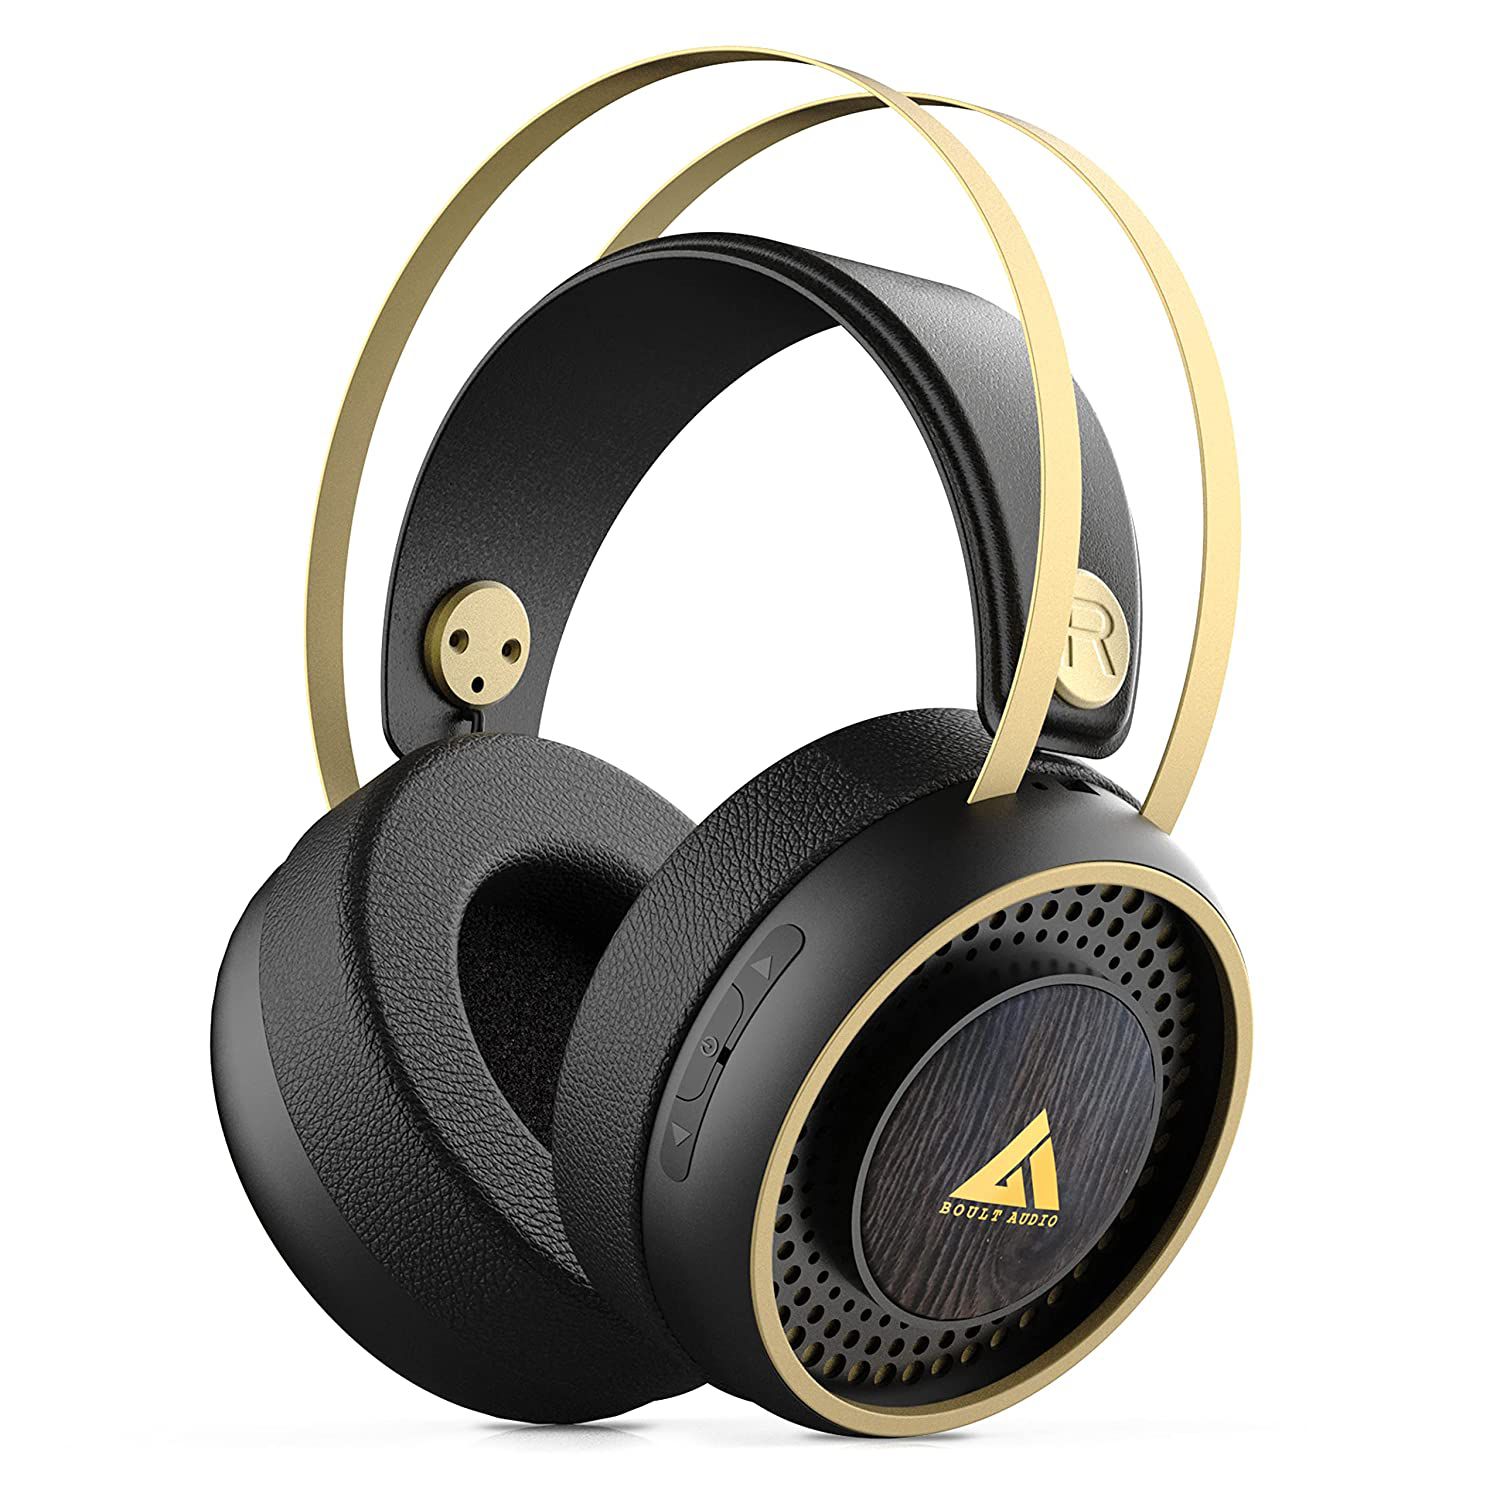 Boult Audio ProBass Ranger Over-Ear Wireless Bluetooth Headphones with Microphone, Headset with Noise Cancellation & Long Battery Life (Black/Gold)